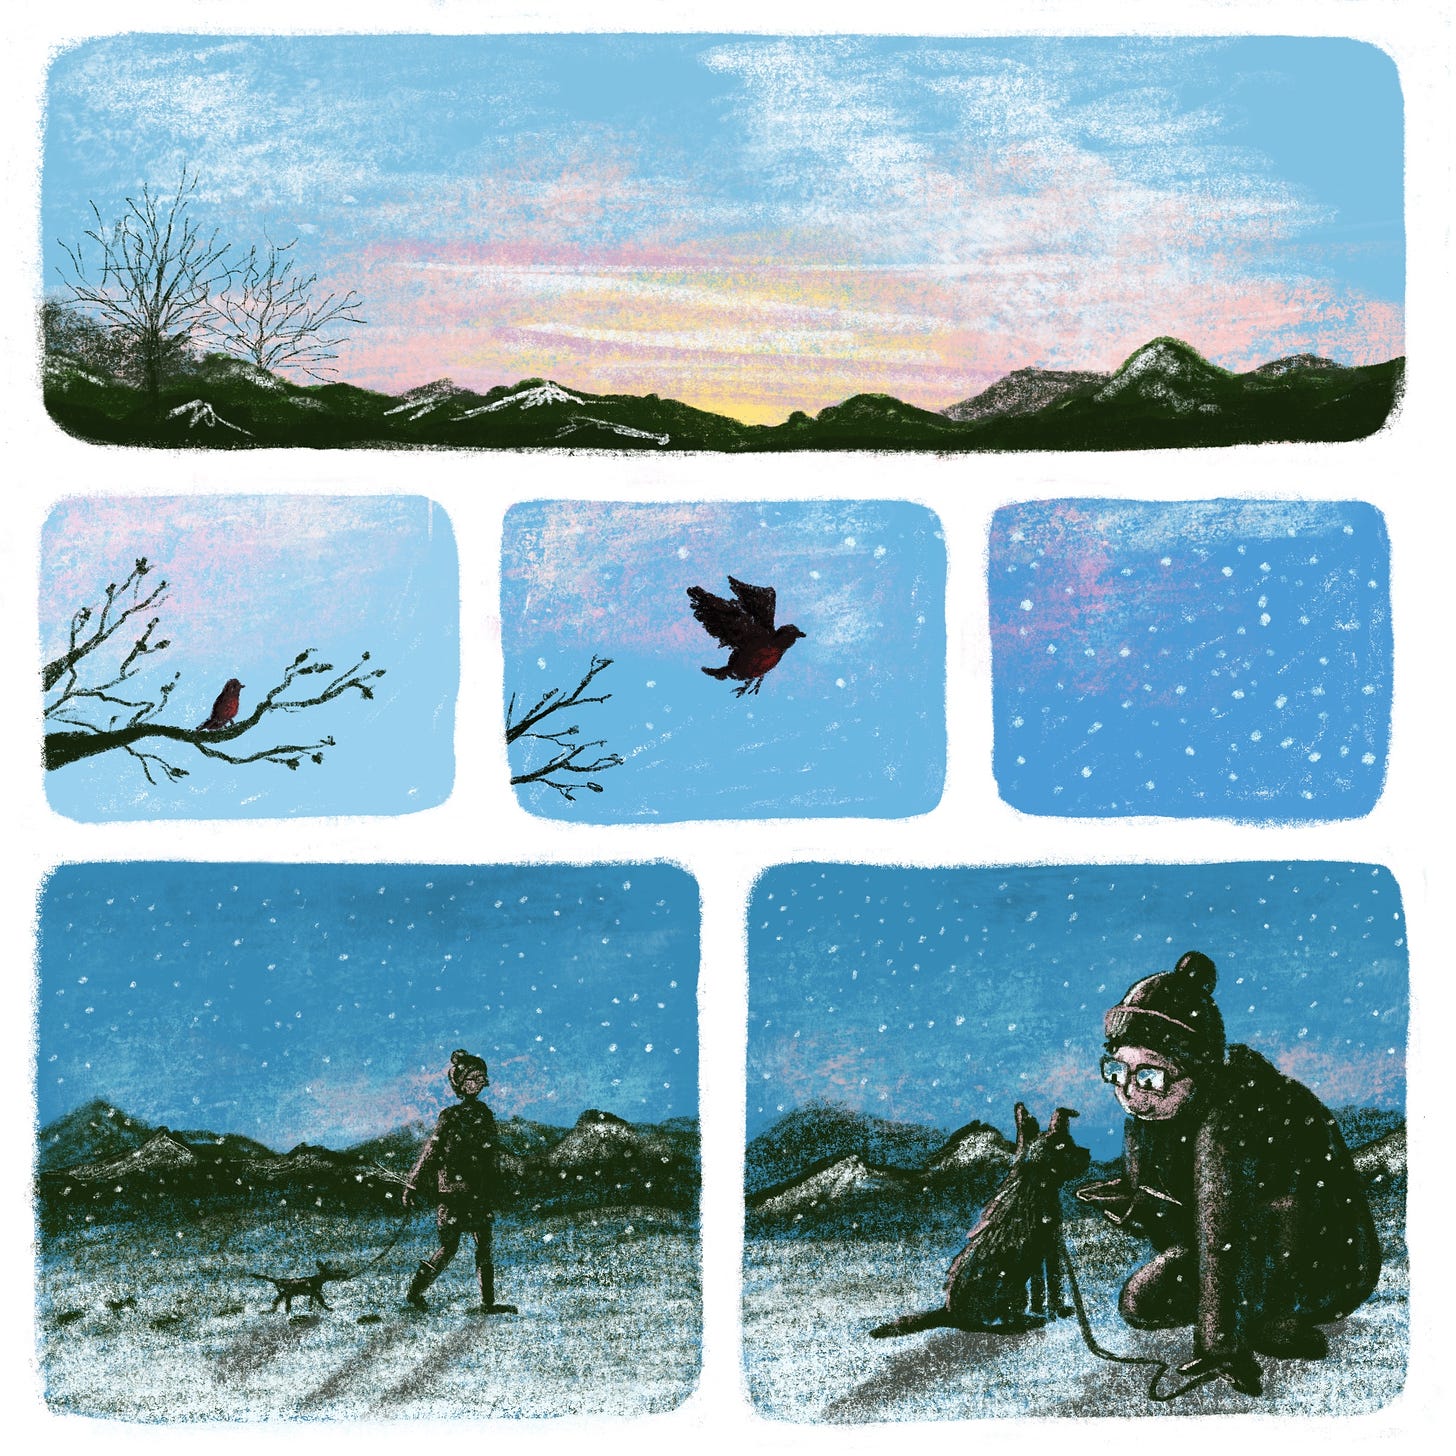 Image description: A six panel comic. The first panel shows a long panoramic view of a clear sunset sky over mountains, with bare winter trees in the foreground. Below, thee small panels show a robin sitting on a branch, then flying off the branch, and then a light snow beginning to fall. On the bottom row, two panels show first, a human and dog walking in front of the mountains as the snow begins to fall. In the last panel, the human crouches down and offers the dog a treat.